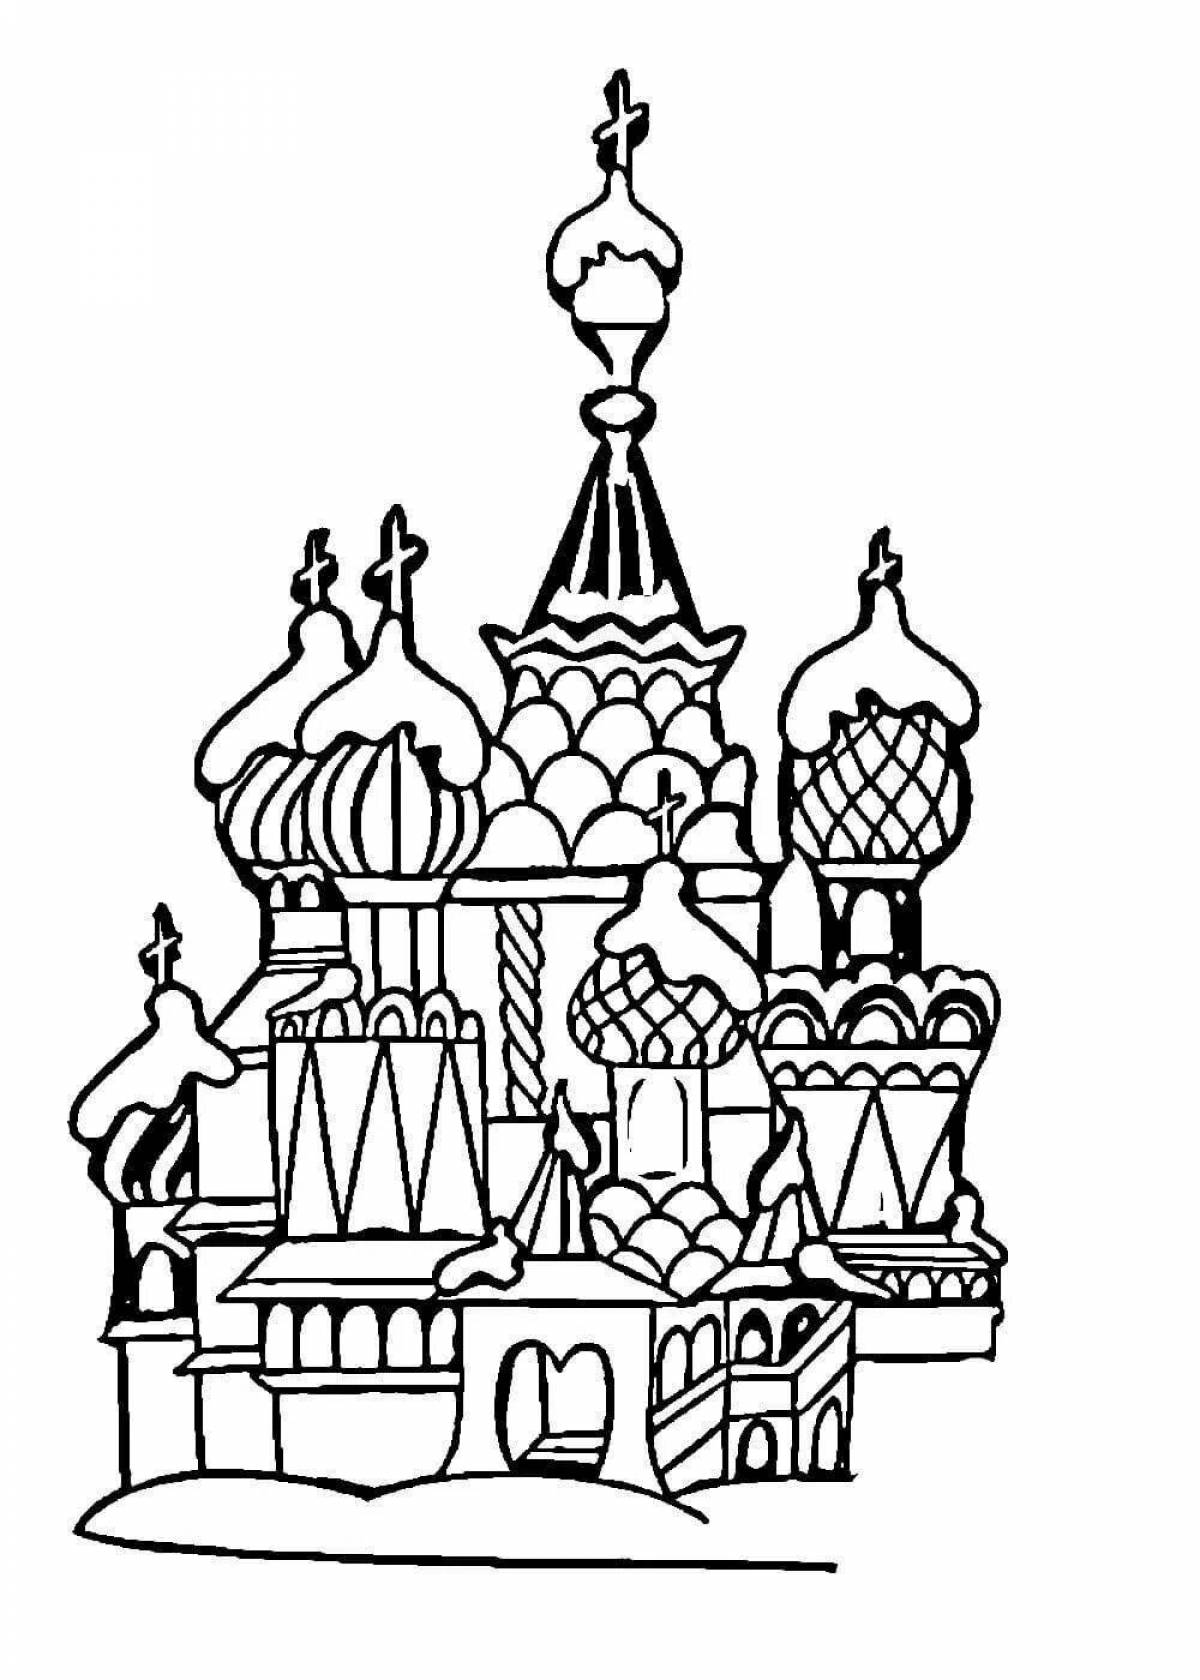 Bright russian day coloring page